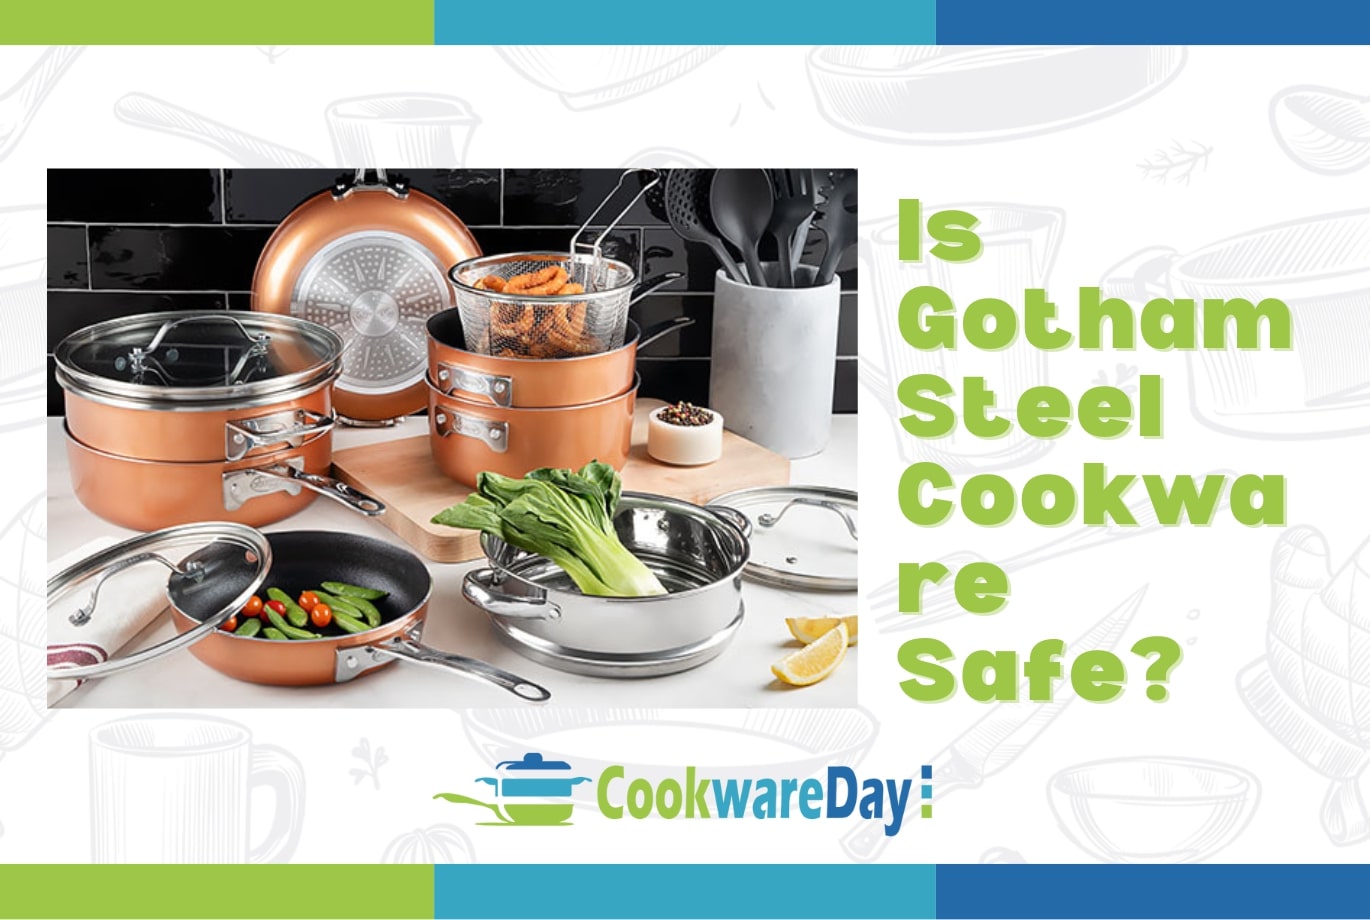 Is Gotham Steel Cookware Safe? about its Quality